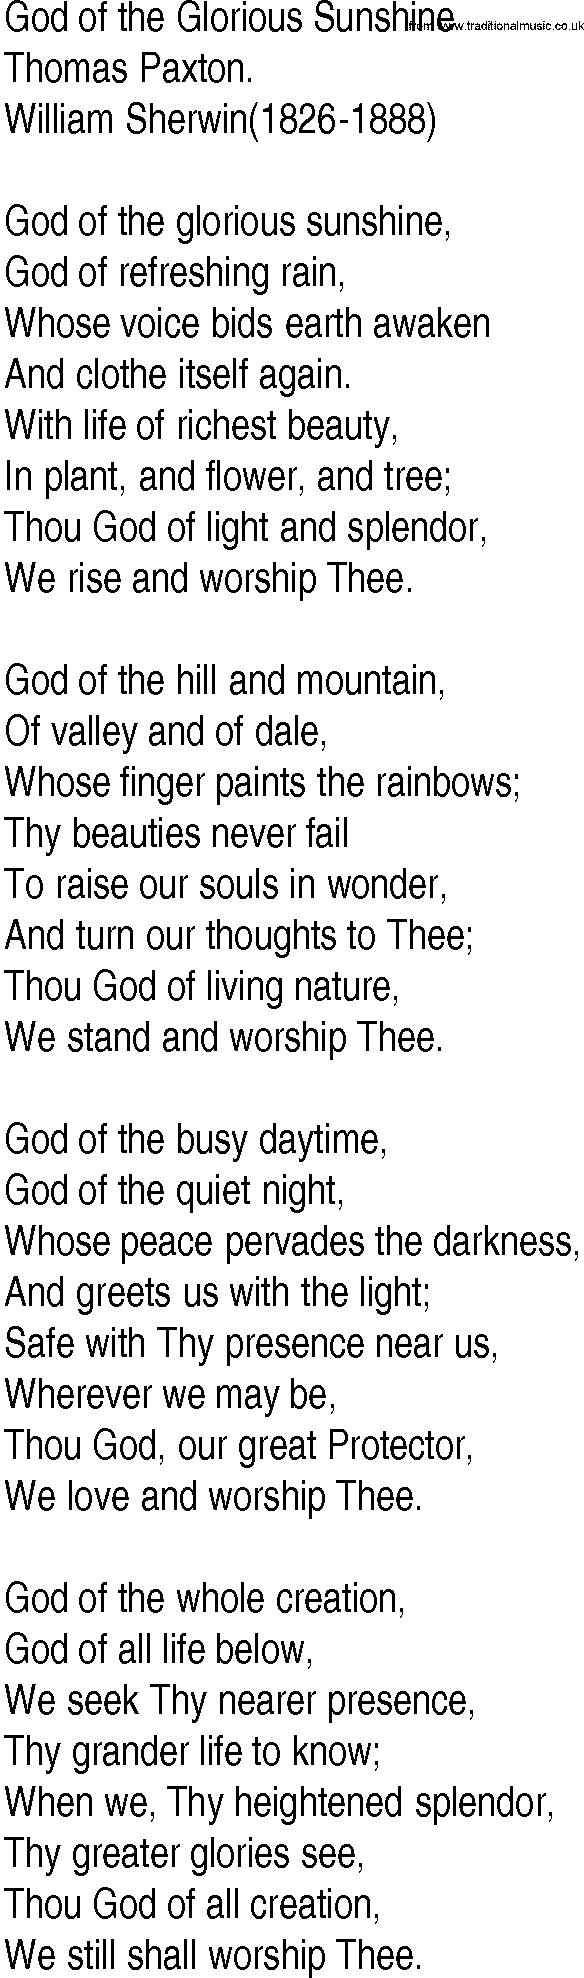 Hymn and Gospel Song: God of the Glorious Sunshine by Thomas Paxton lyrics